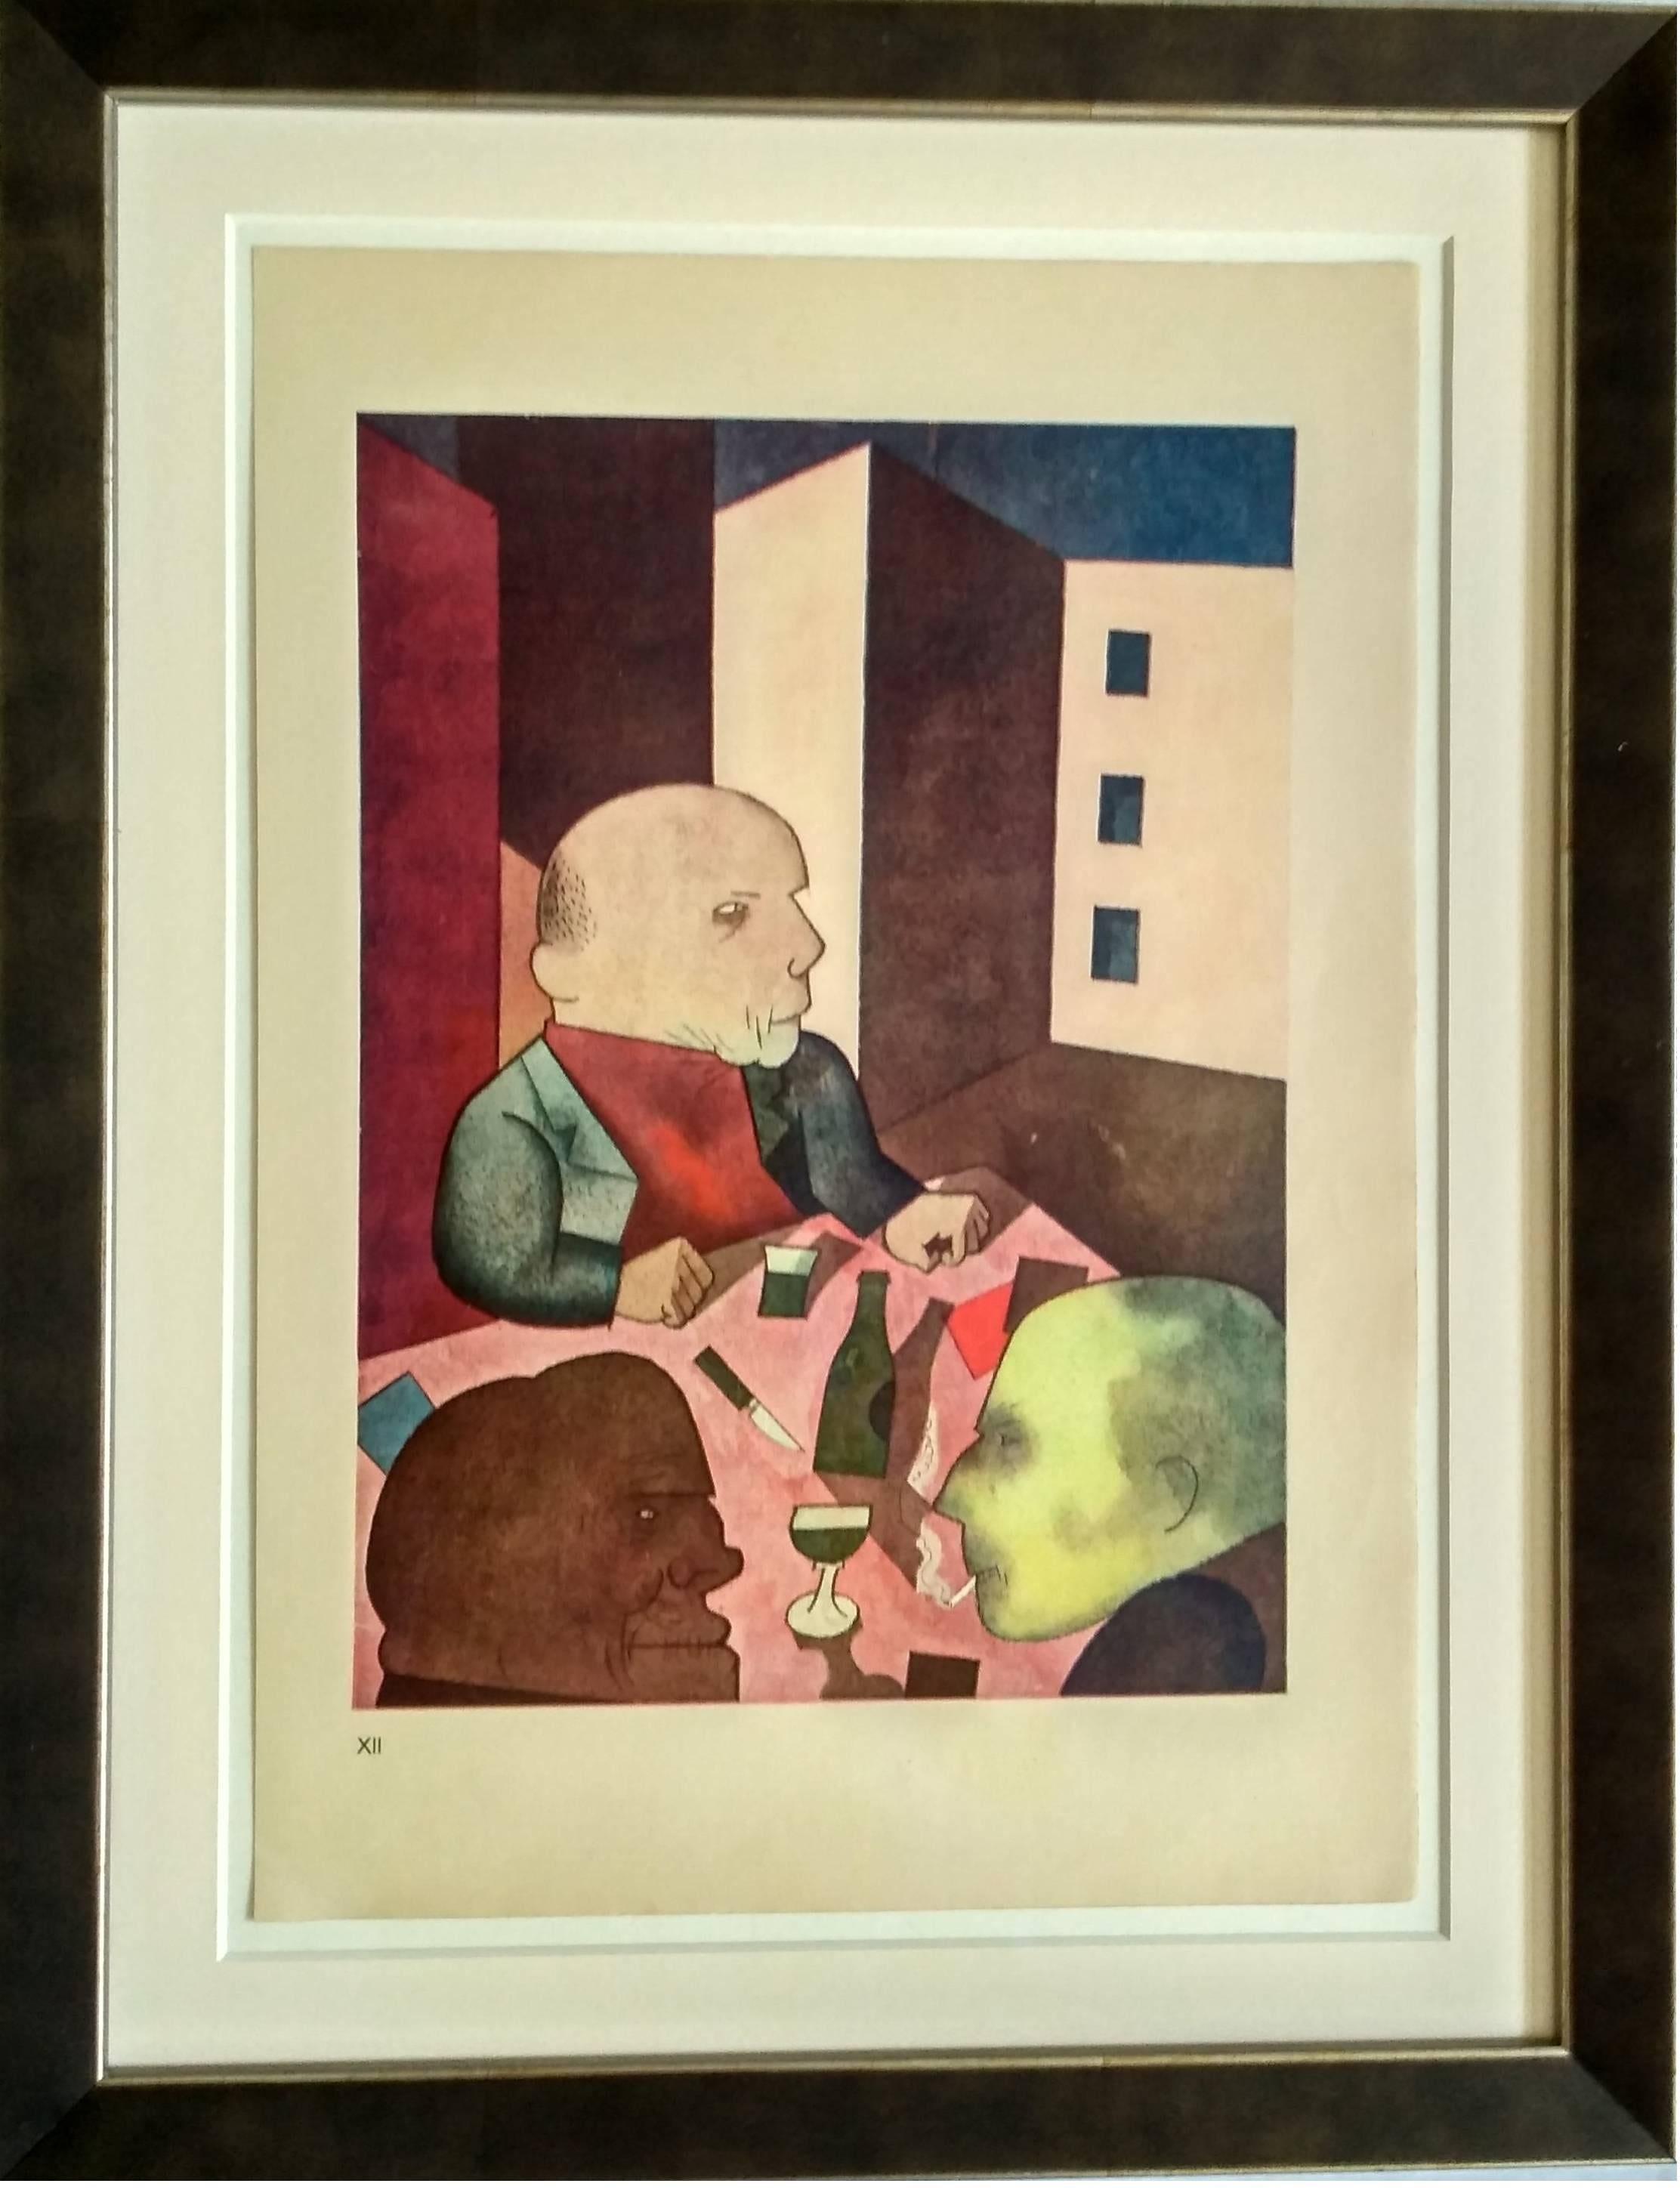 Color Lithograph on handmade paper from Ecce Homo, by George Grosz, 1921
Printed by Kunstanstalt Dr. Selle & Co. AG, Berlin. Published by Malik Verlag, 1923
Numbered in Roman numerals lower left. Here number XII. Under museum glass